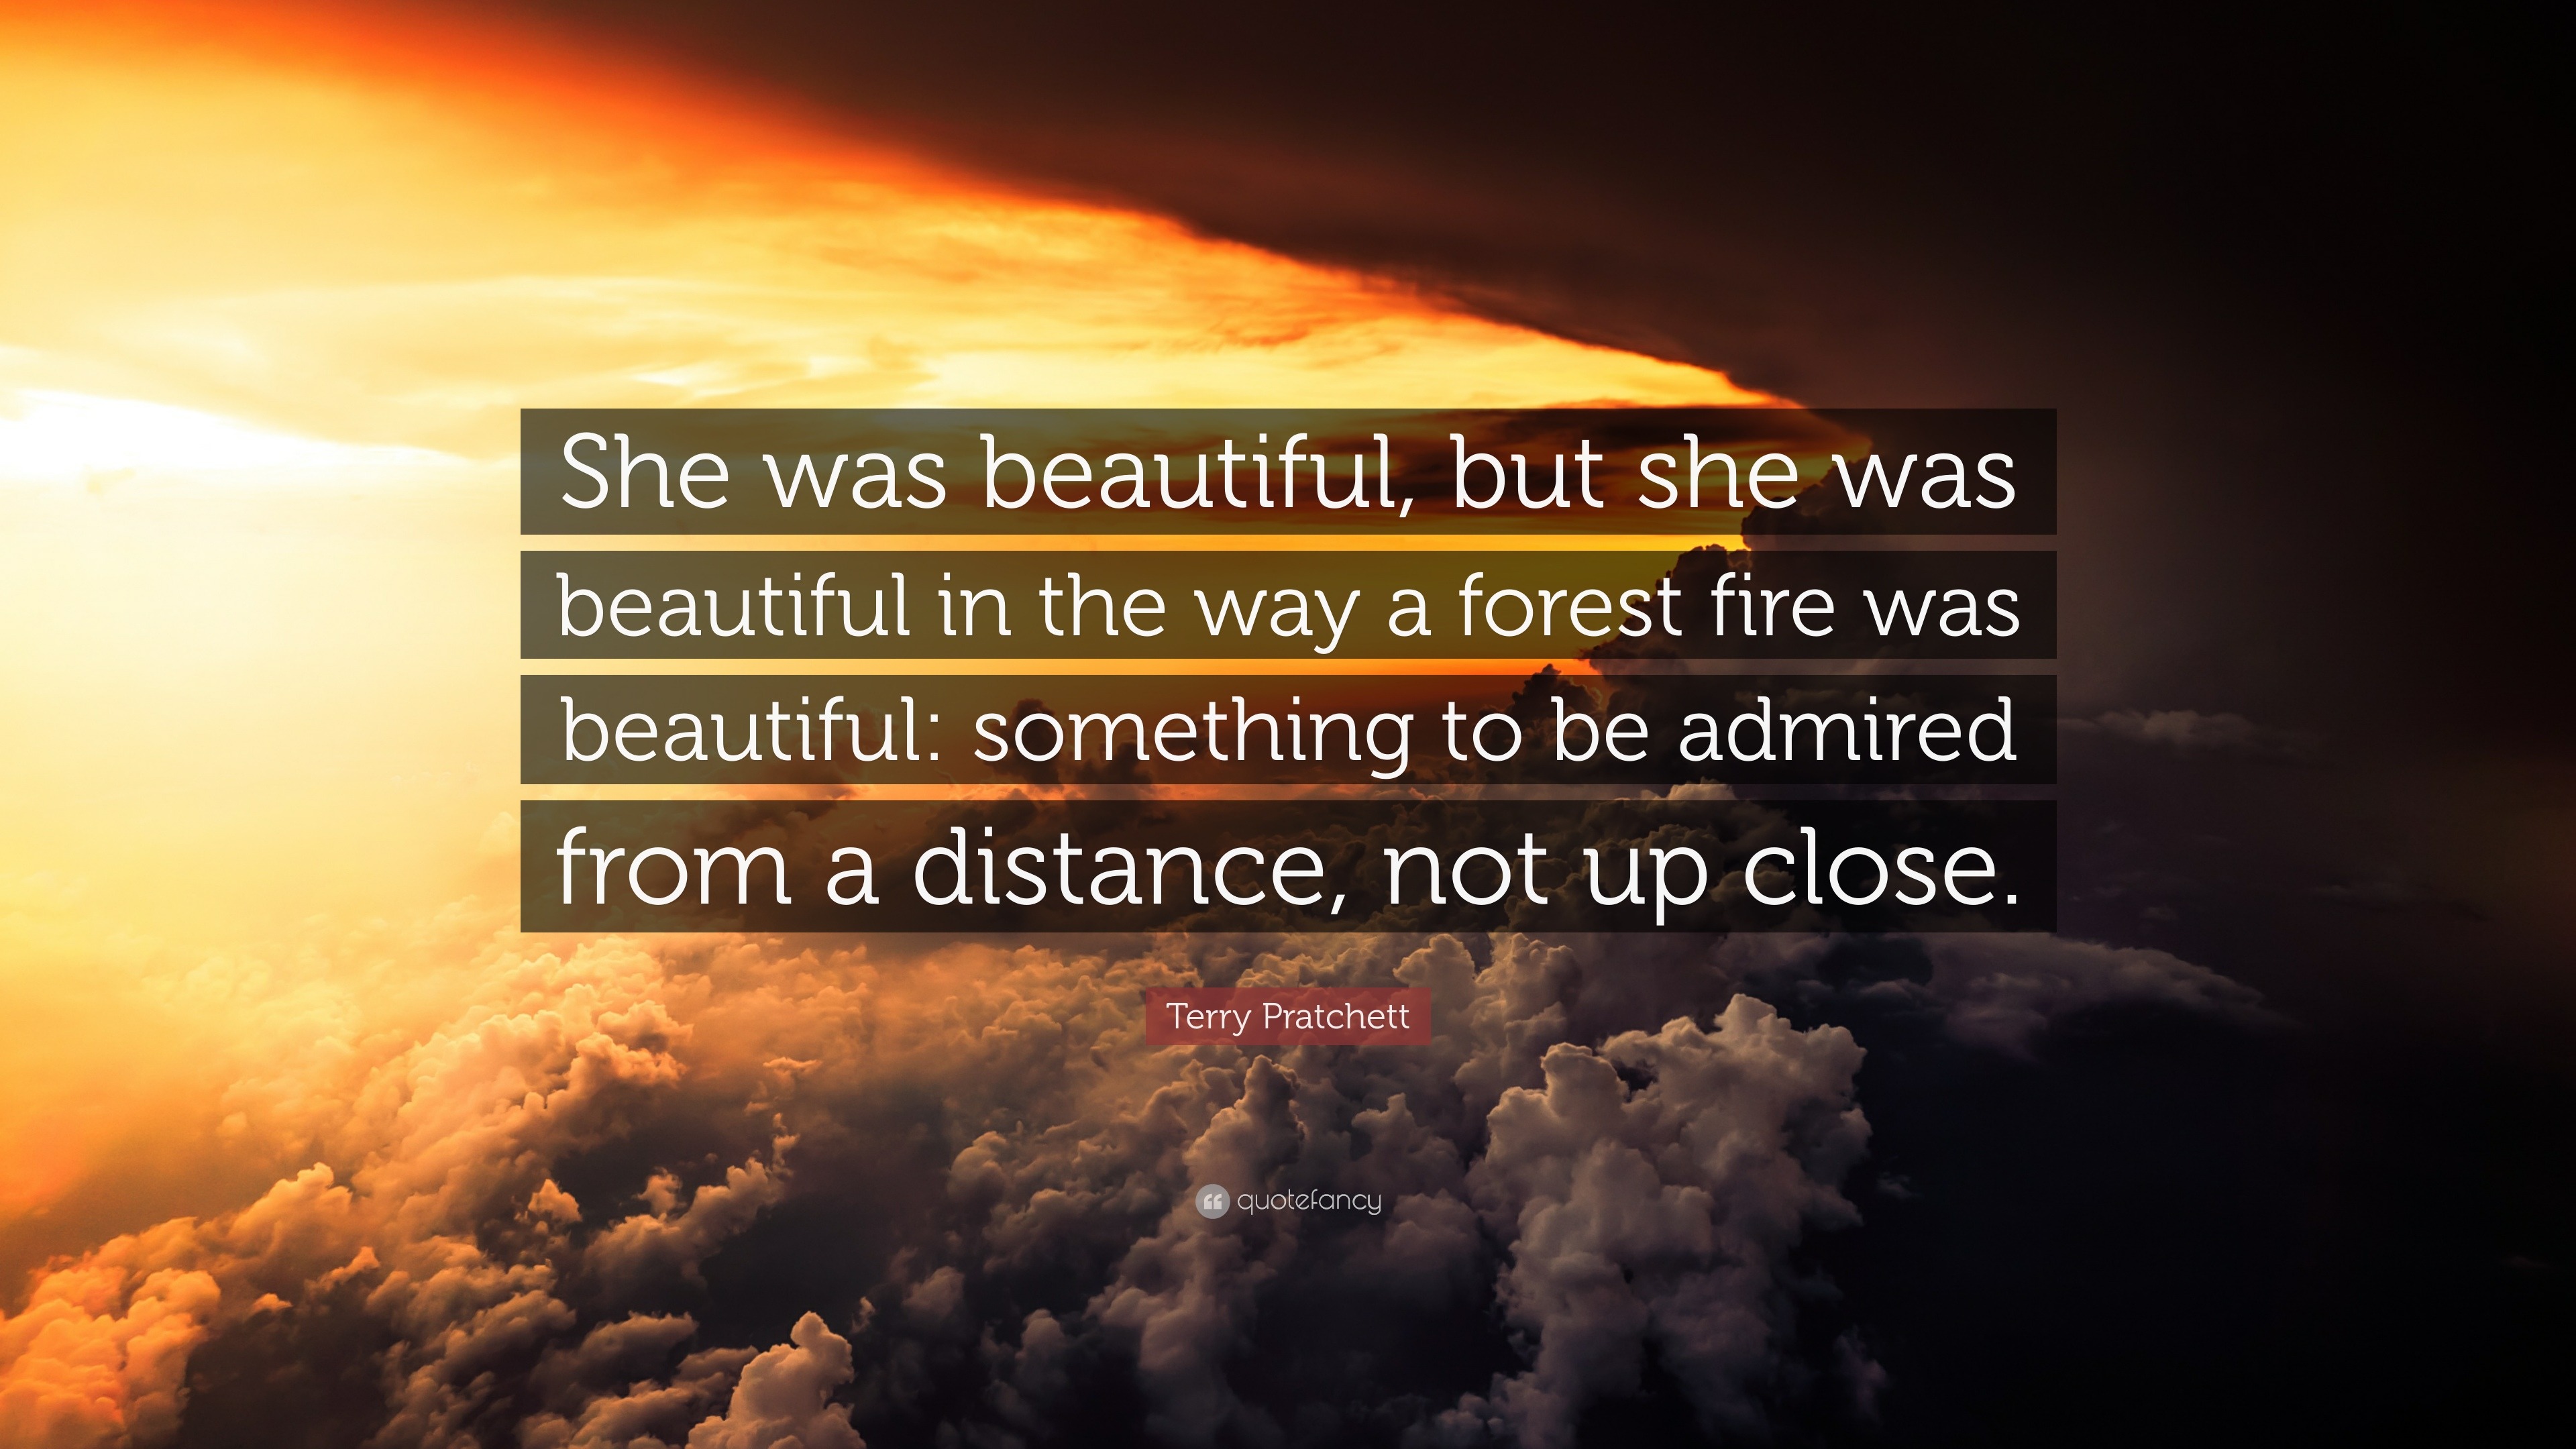 Terry Pratchett Quote She Was Beautiful But She Was Beautiful In The Way A Forest Fire Was Beautiful Something To Be Admired From A Distance 12 Wallpapers Quotefancy